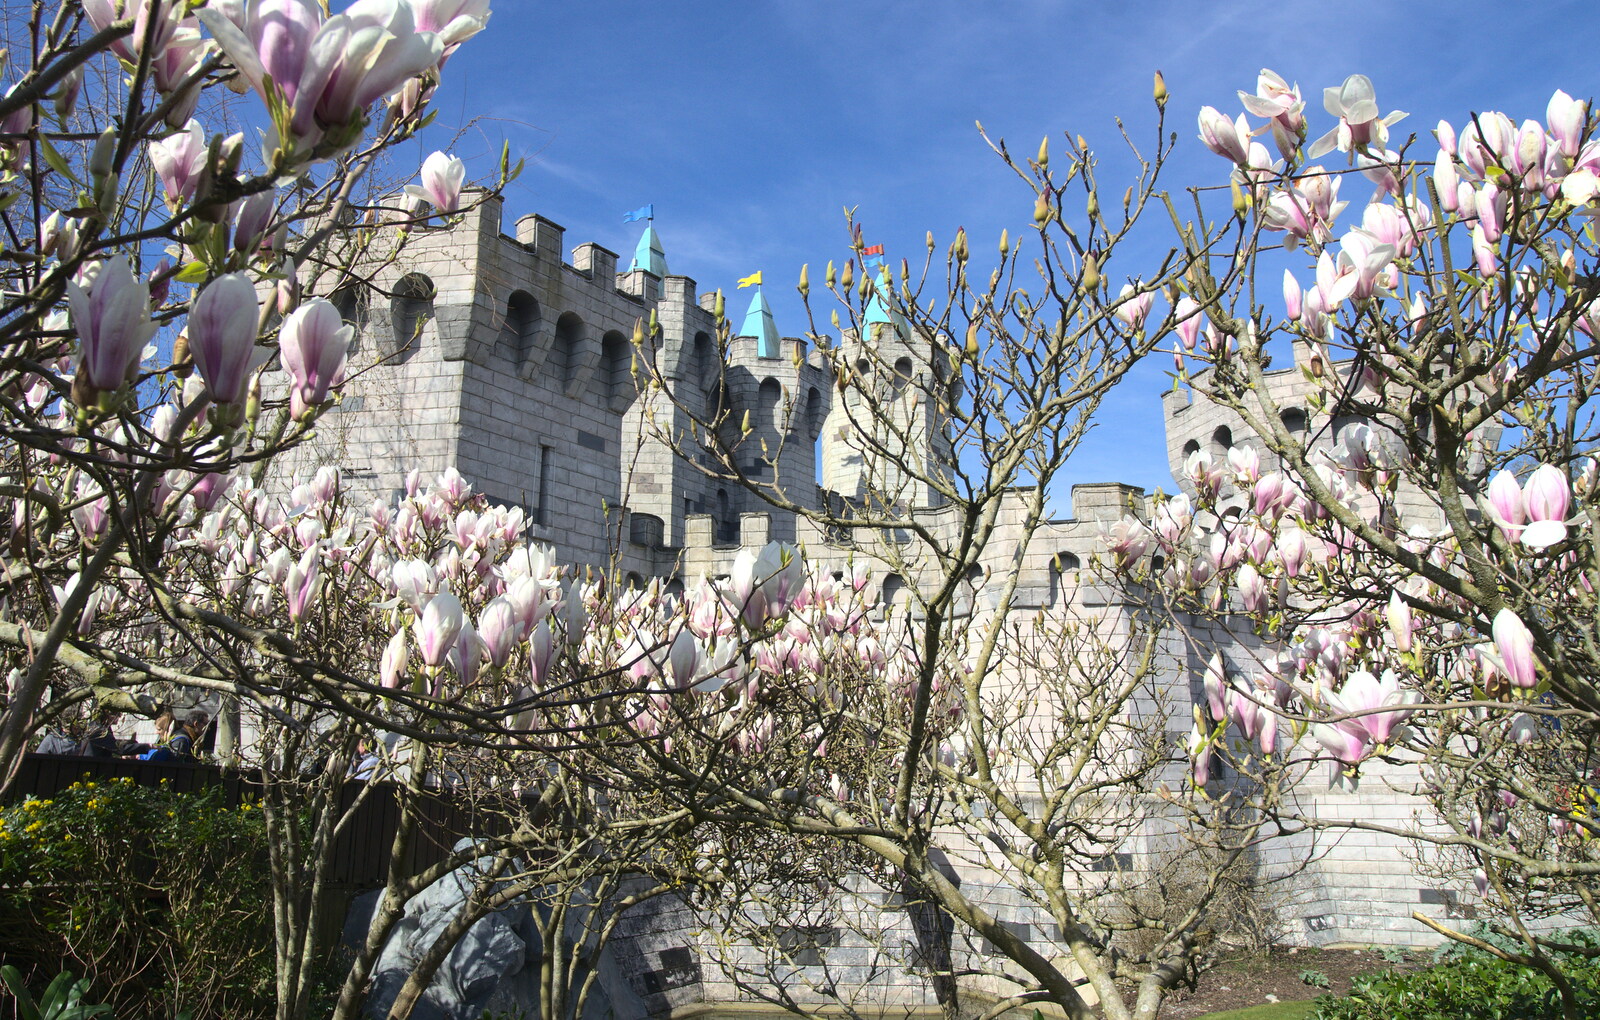 Magnolia trees and the Knight's Kingdom castle from A Trip to Legoland, Windsor, Berkshire - 25th March 2017